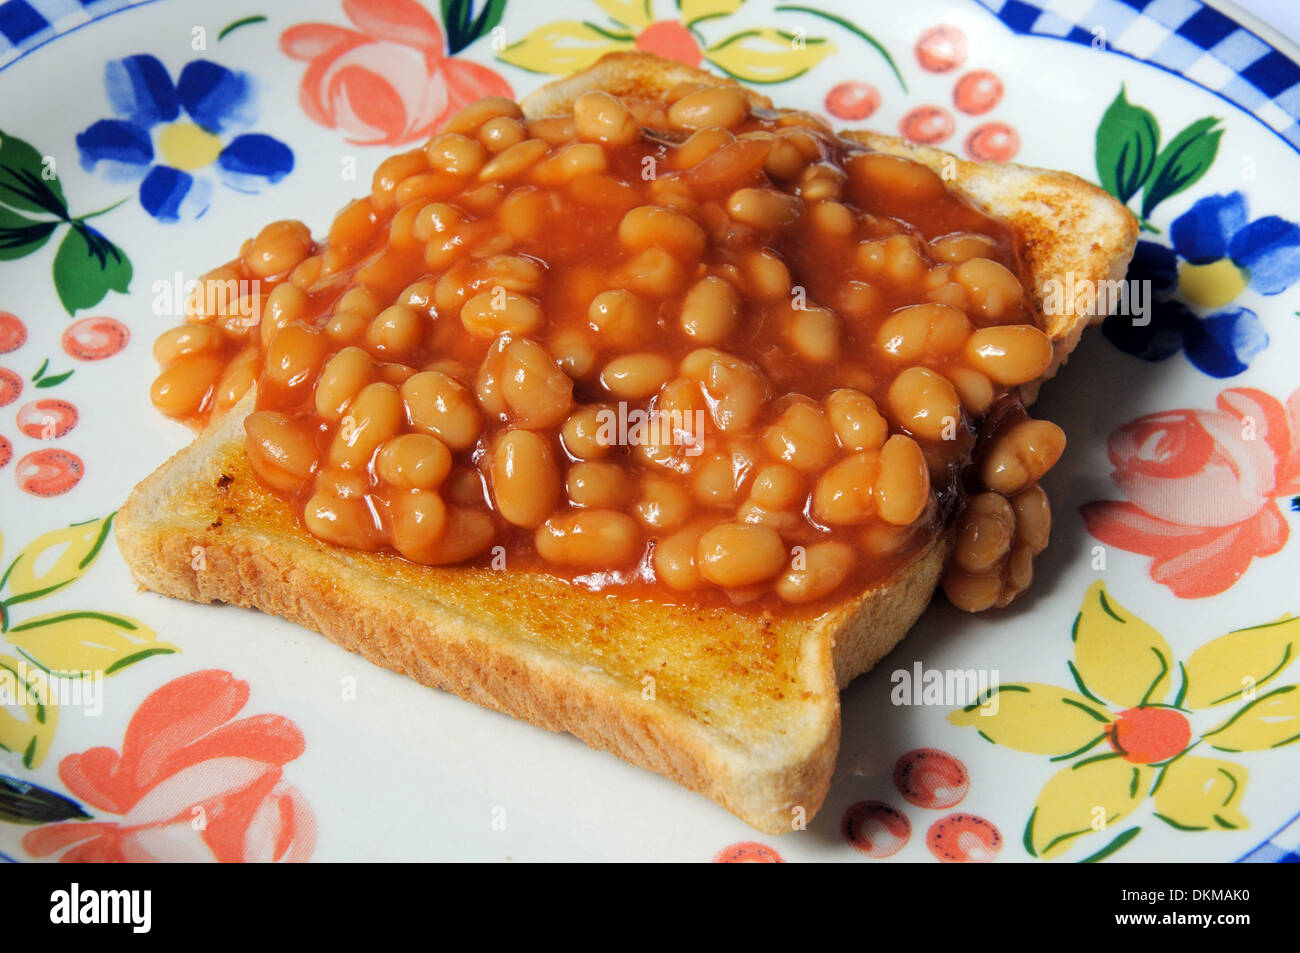 One round of baked beans on toast in tomato sauce. Stock Photo